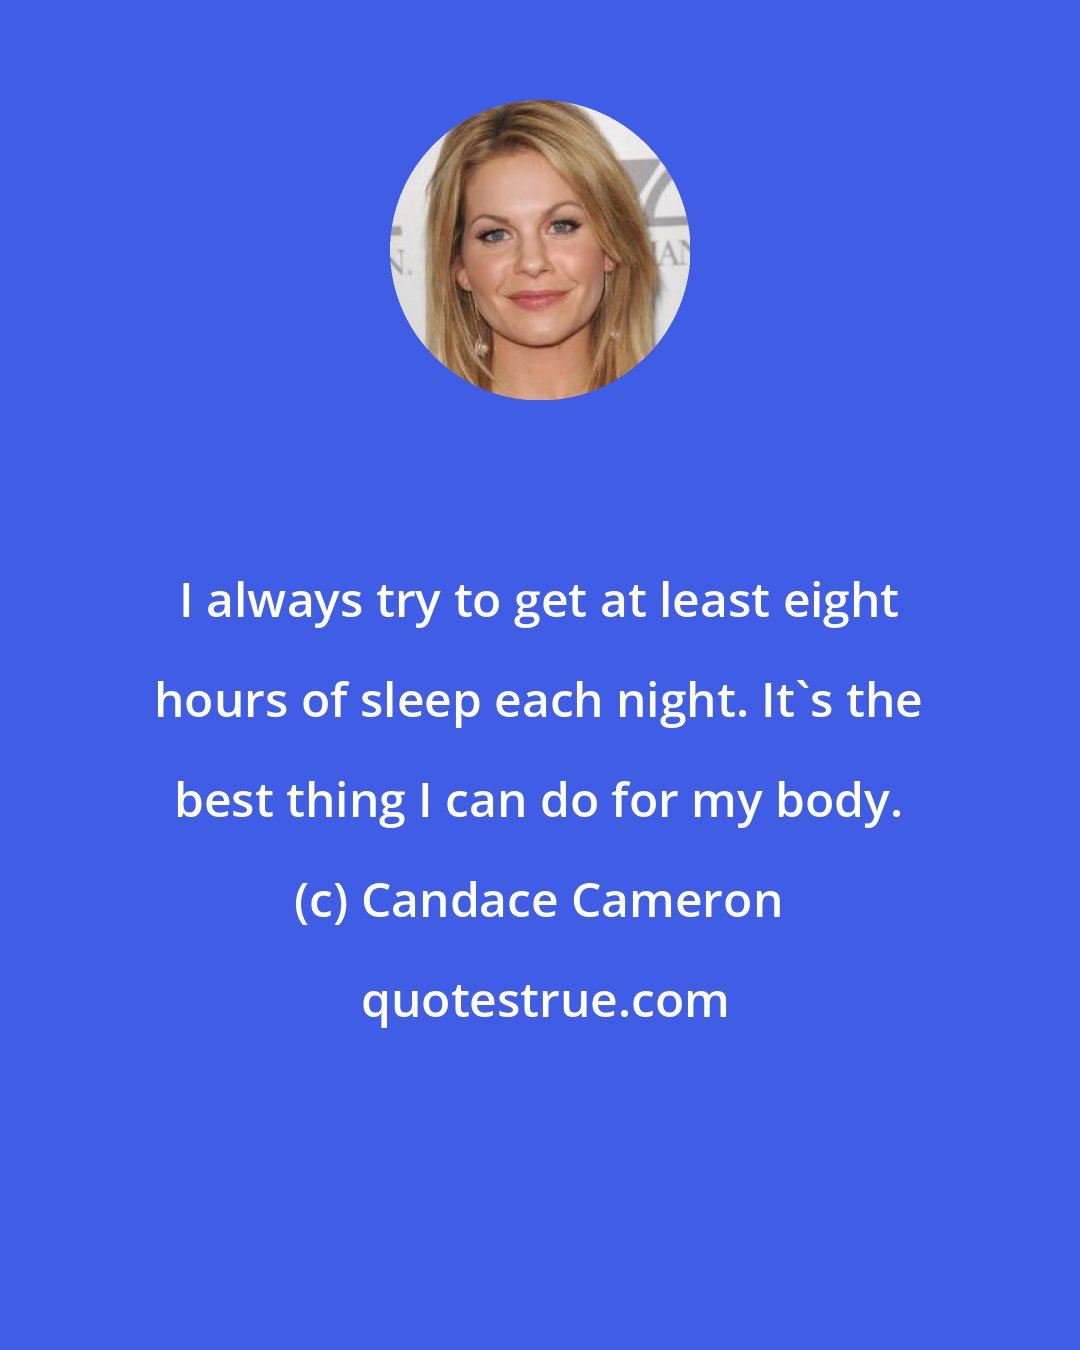 Candace Cameron: I always try to get at least eight hours of sleep each night. It's the best thing I can do for my body.